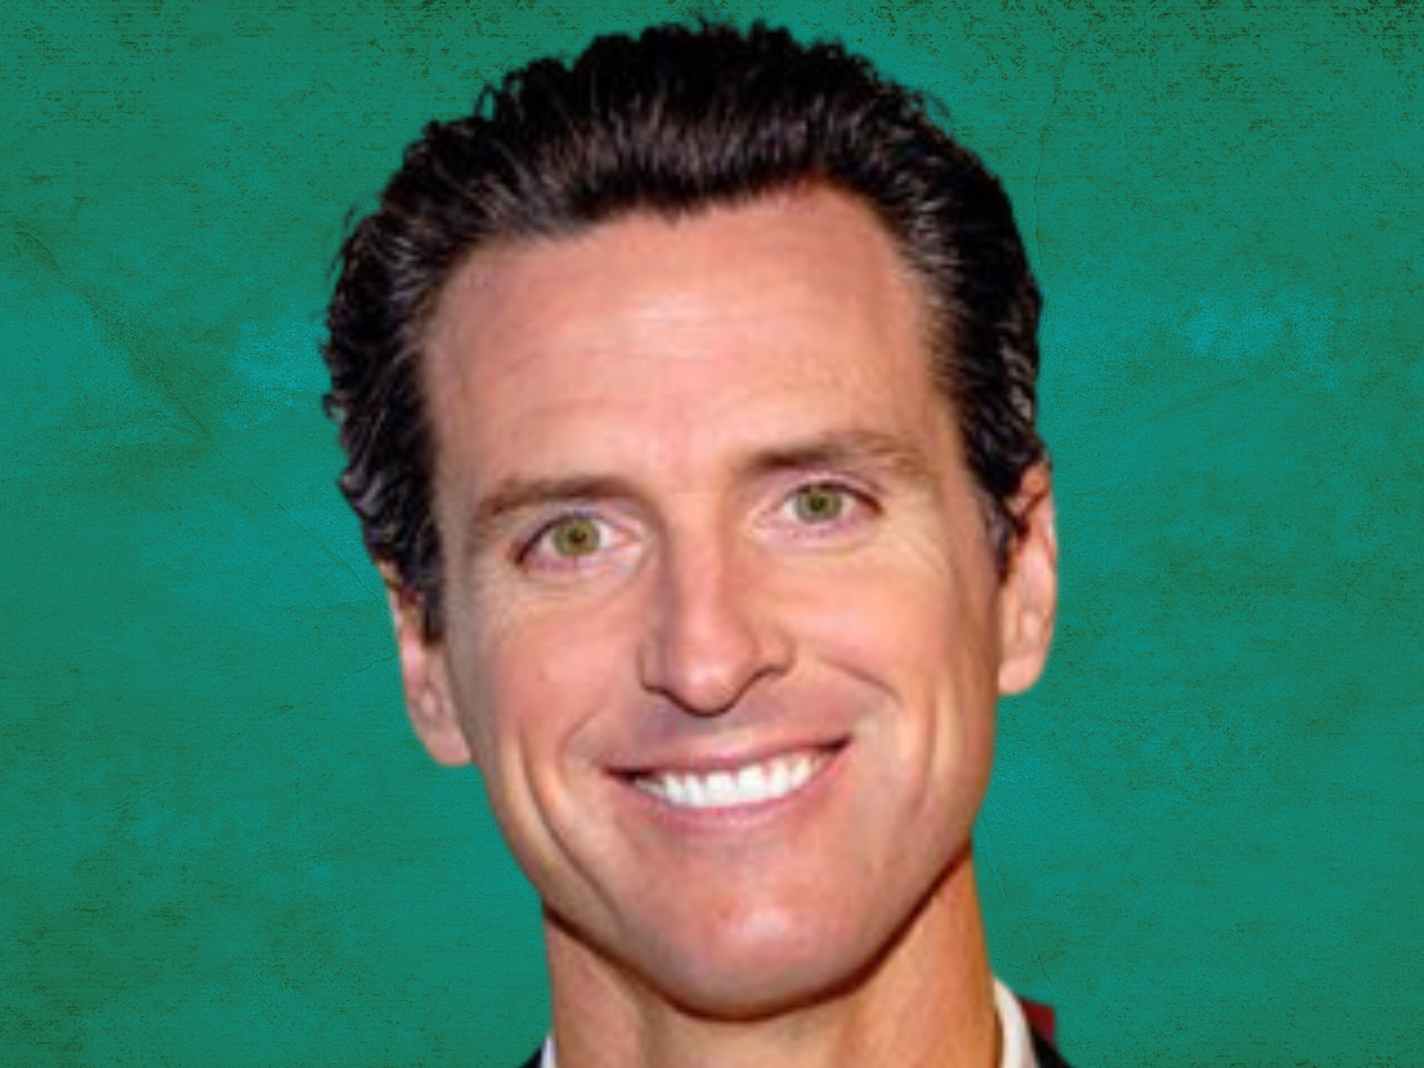 Gavin Newsom Has the Brightest Teeth in Politics – Are They Real or Fake?